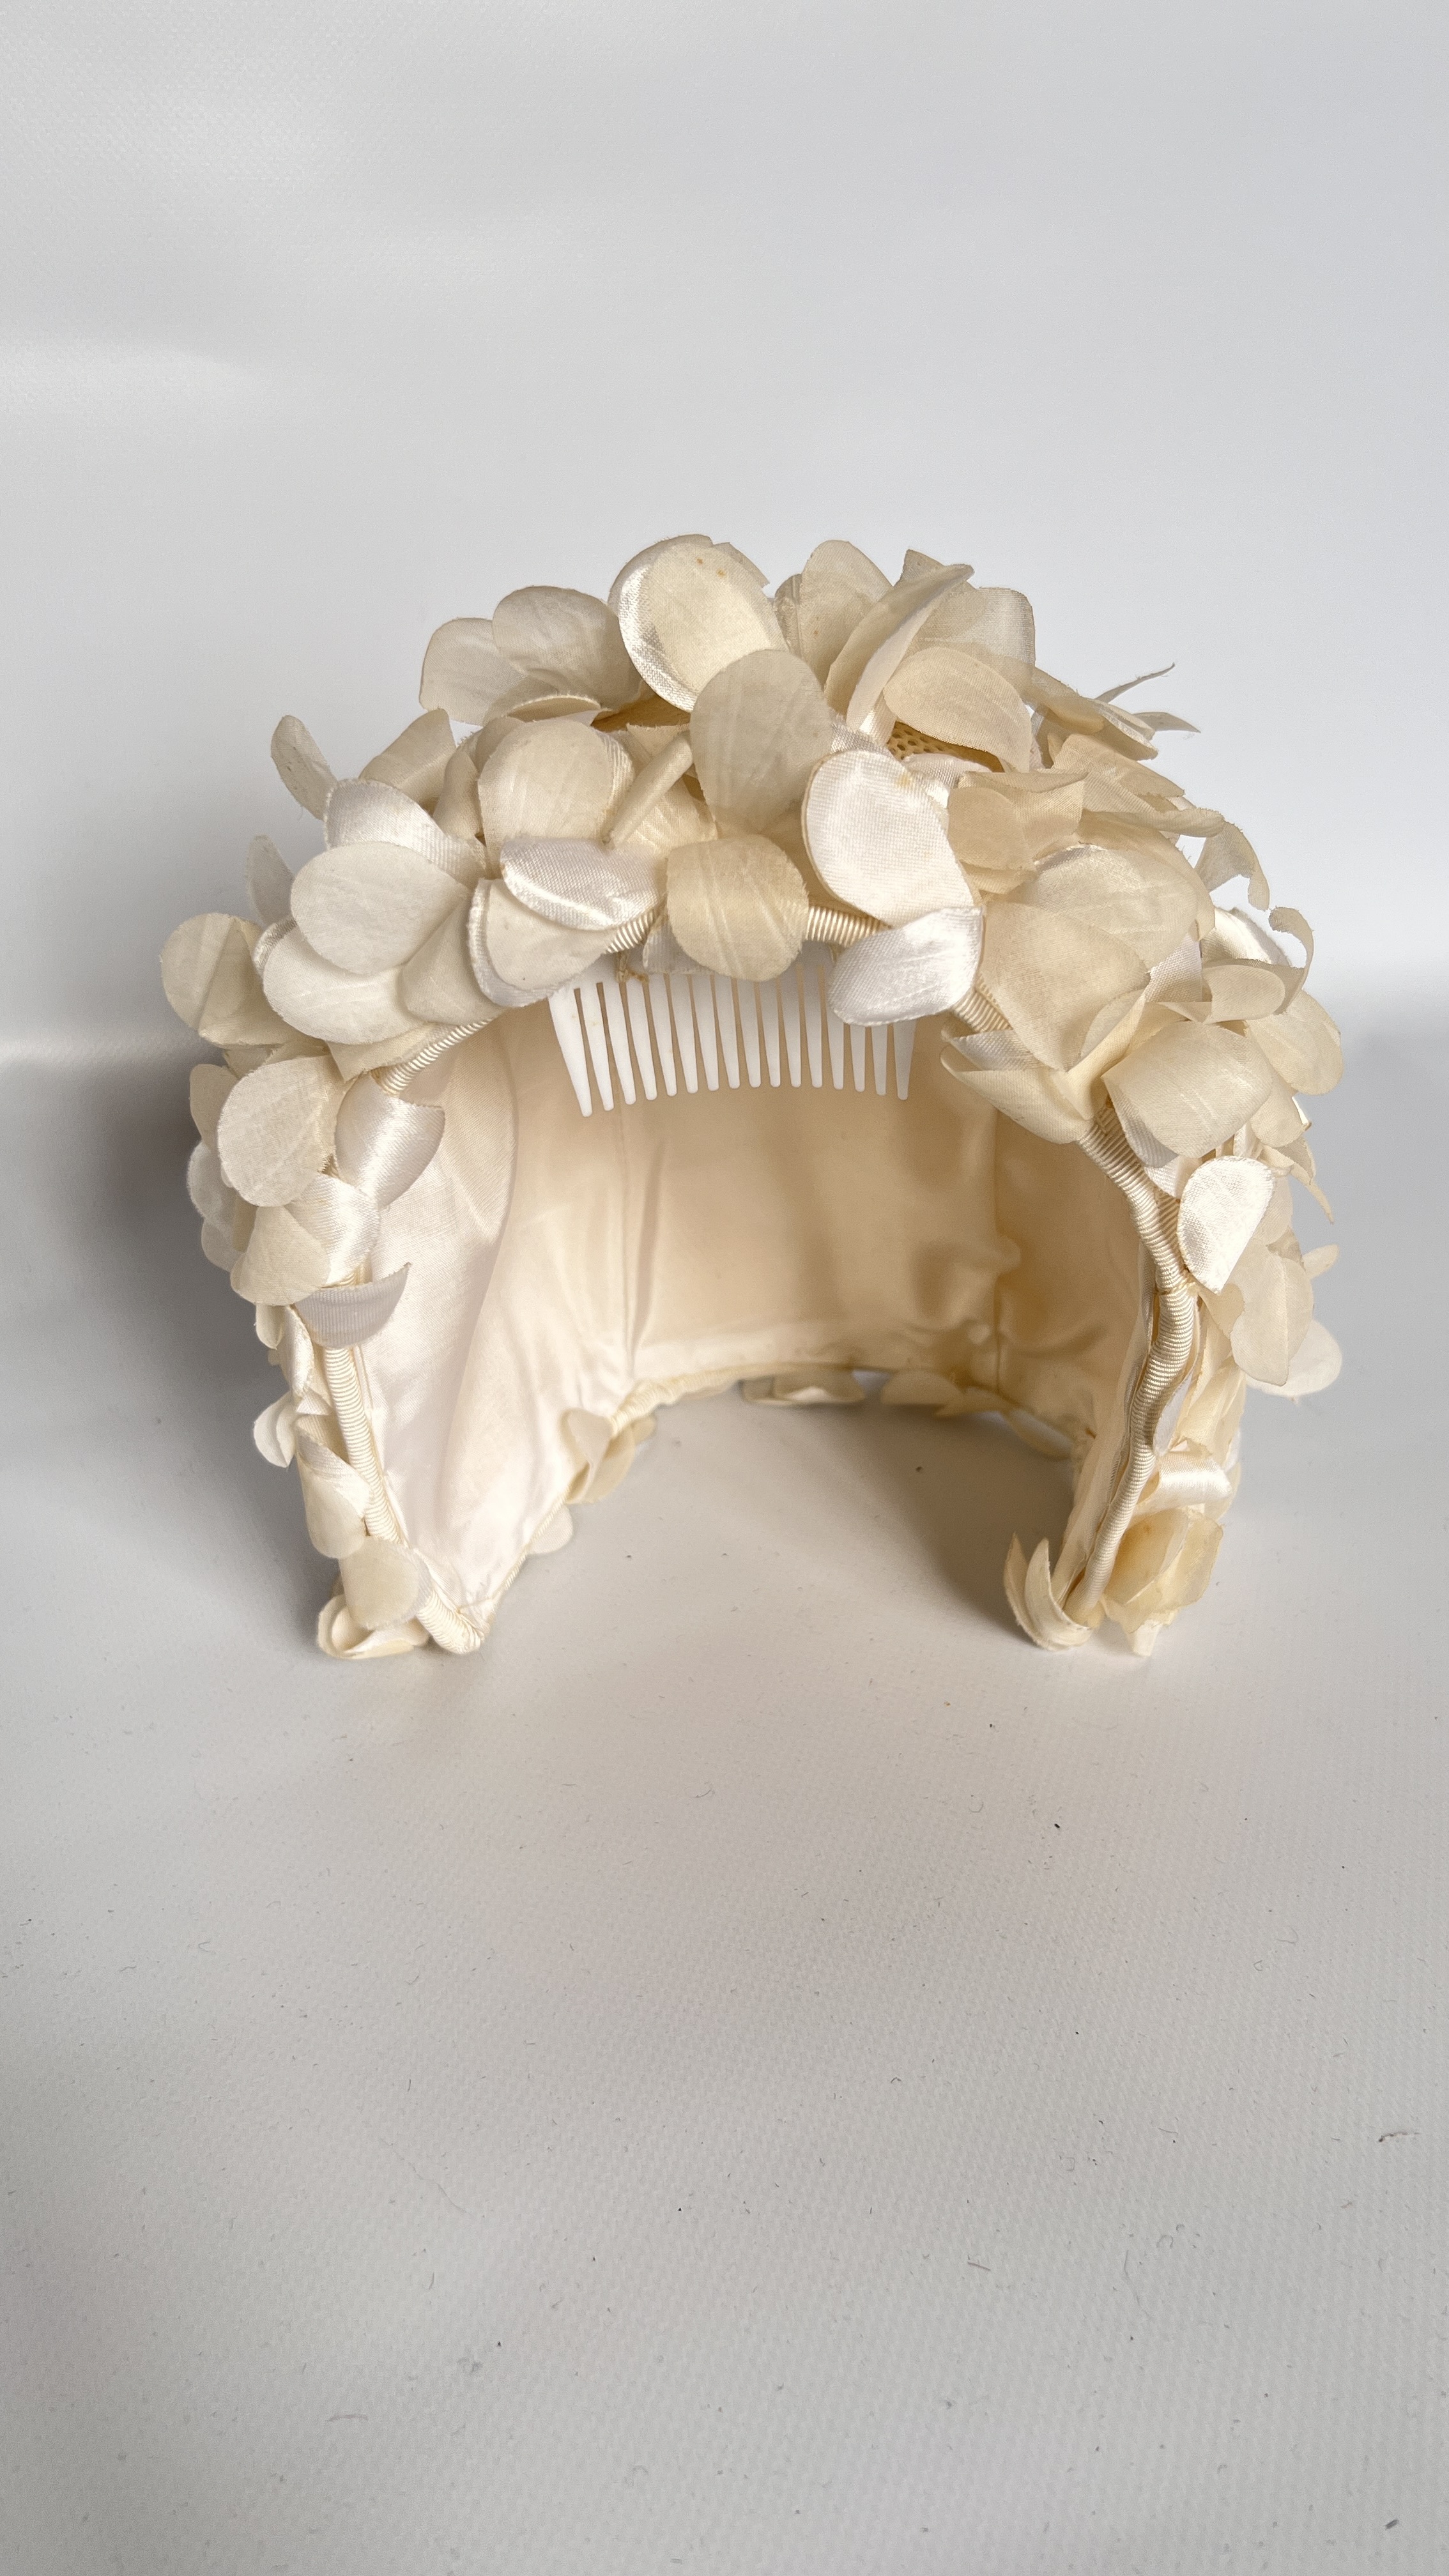 8 1950/60S HATS, 2 FLOWERED BONNETS, 1 WHITE KNITTED BONNET WITH WHITE PLASTIC DISCS, - Image 27 of 32